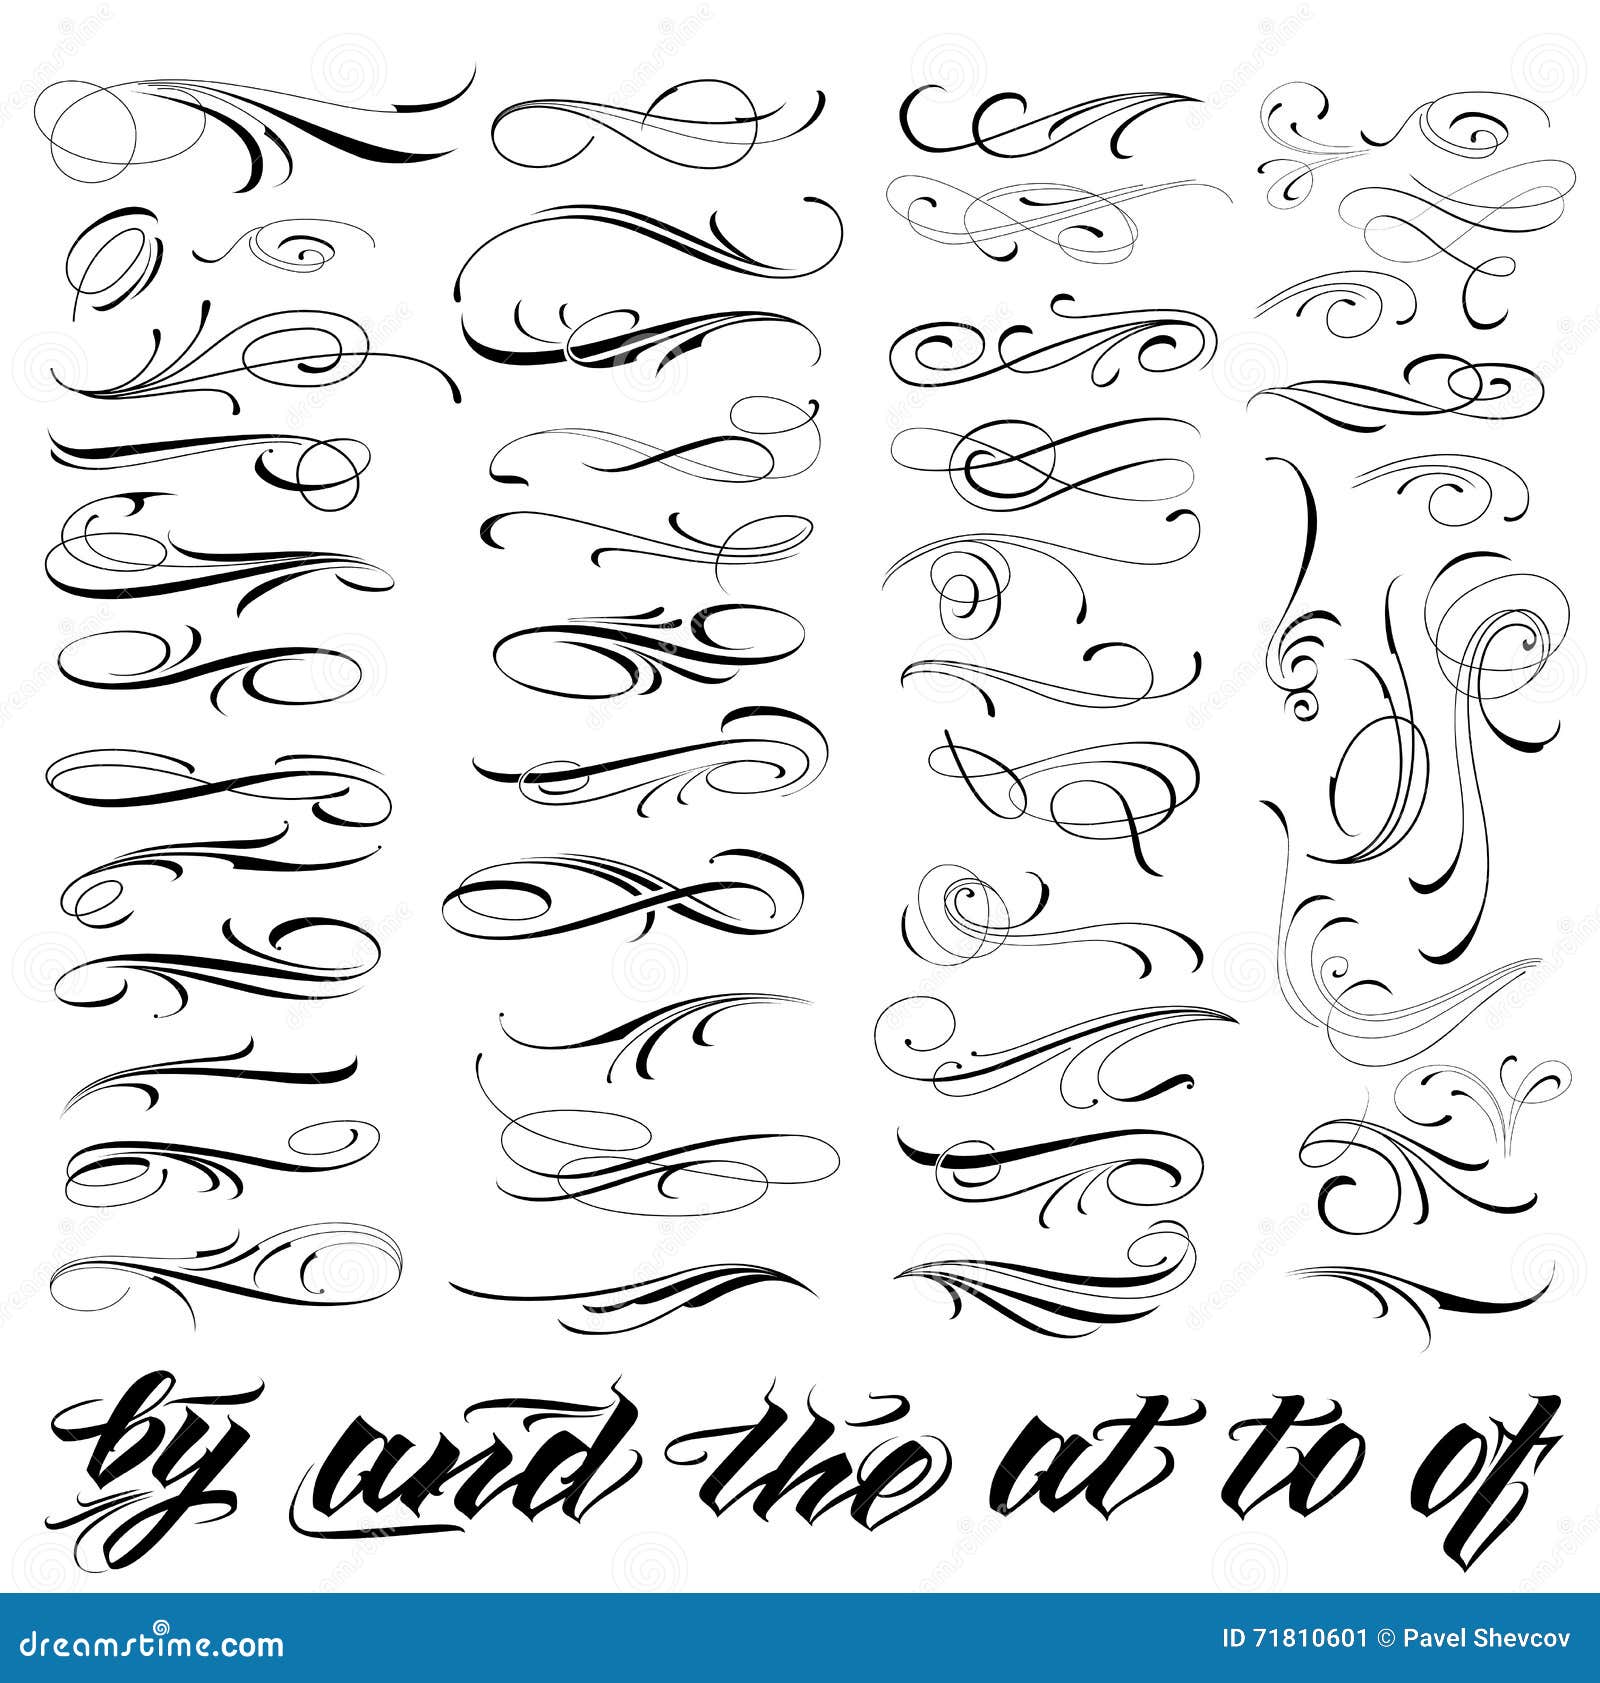 Chicano Tattoo Lettering Stock Illustrations  54 Chicano Tattoo Lettering  Stock Illustrations Vectors  Clipart  Dreamstime